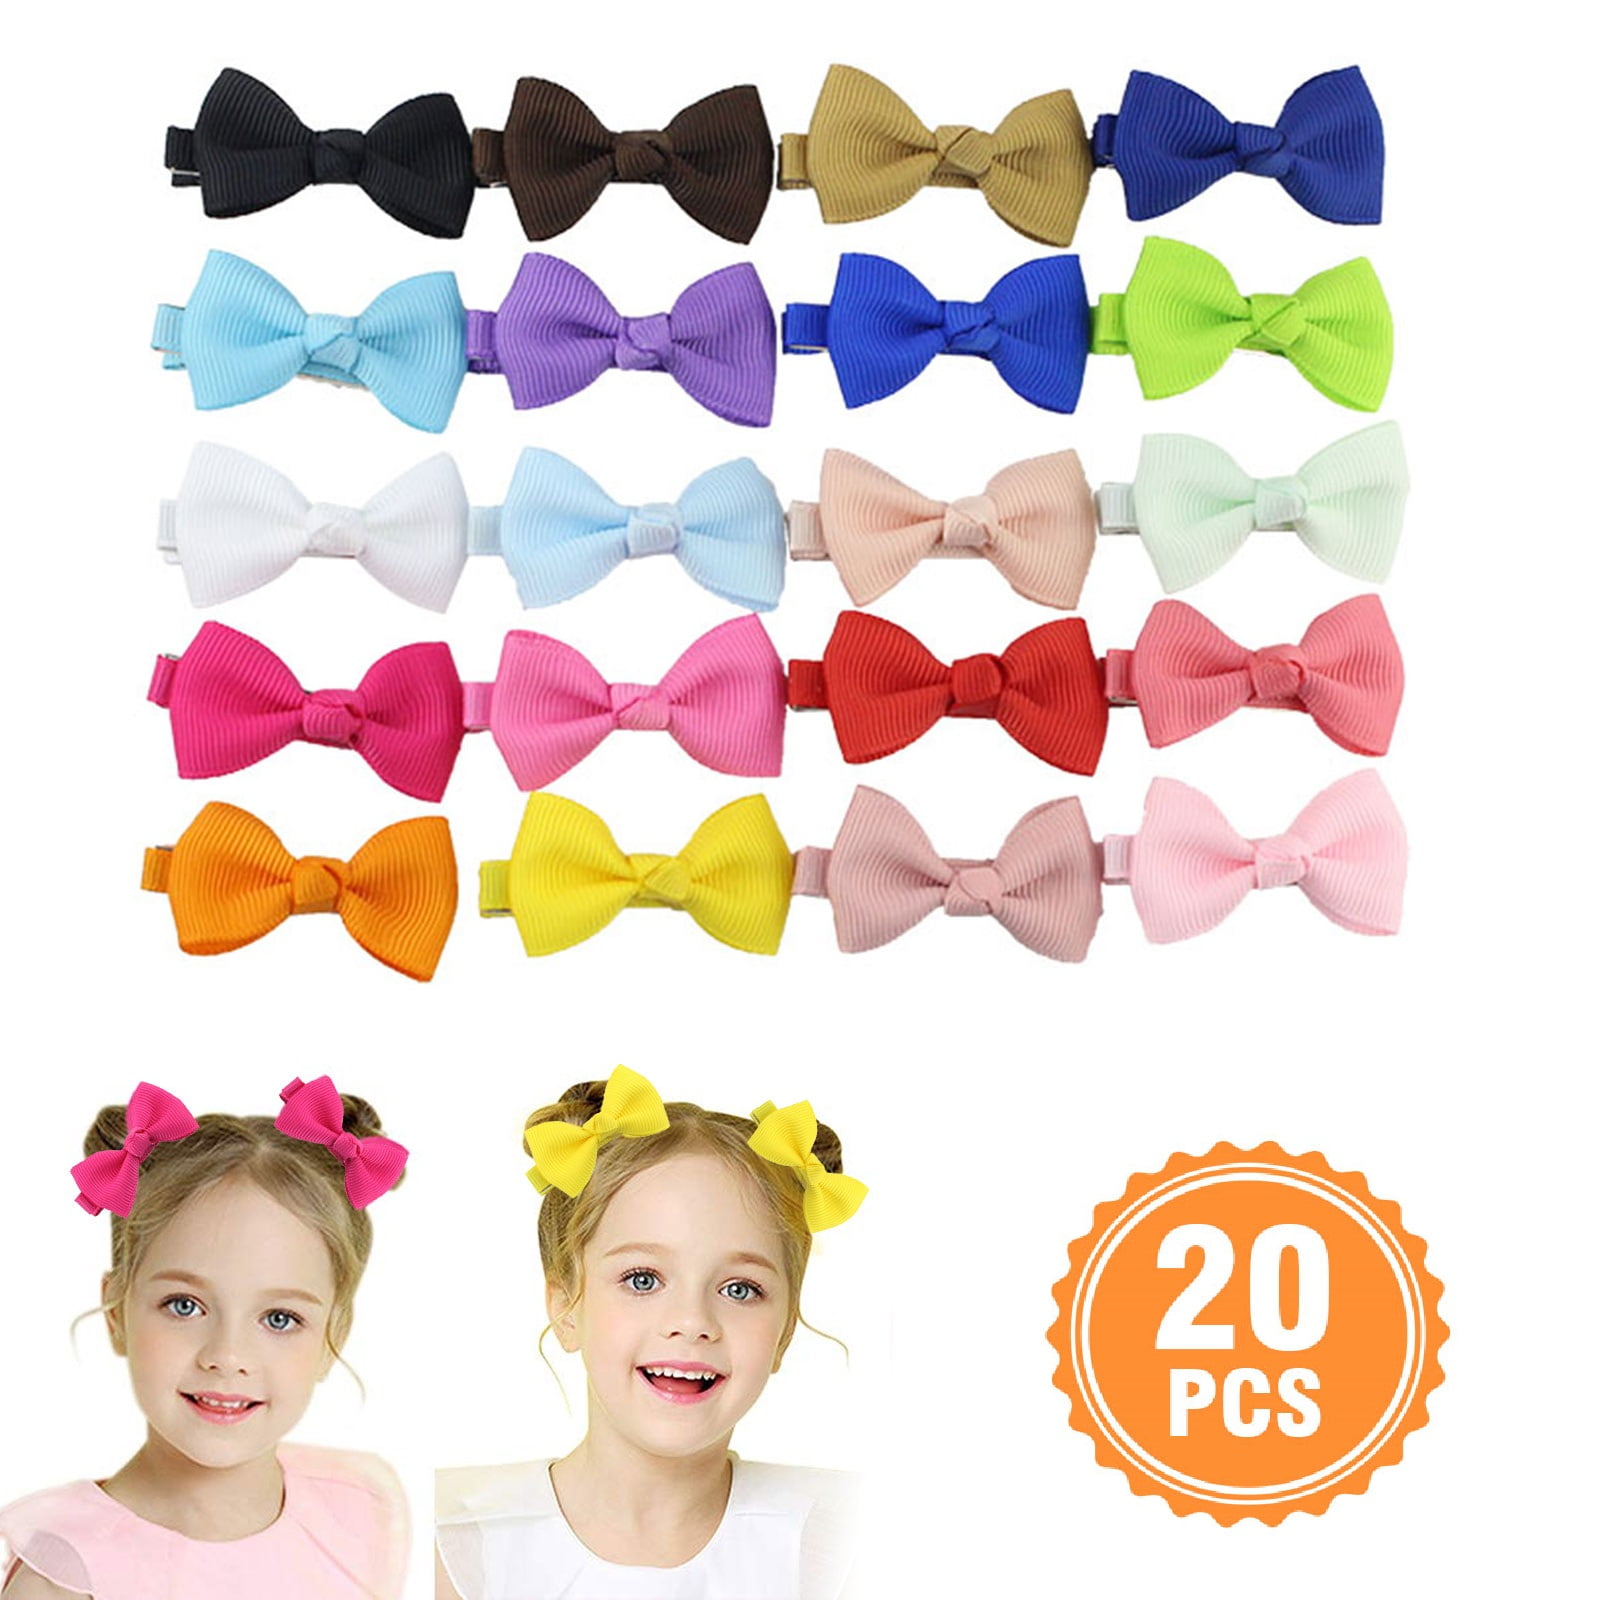 Baby Girls Hair Bows Clips, 4/2" Grosgrain Boutique Color Ribbon Mini Hair Bows Clips, Alligator Hair Clips Fully Lined Hair Accessories for Baby Girl Toddlers Kids Children in Pairs -